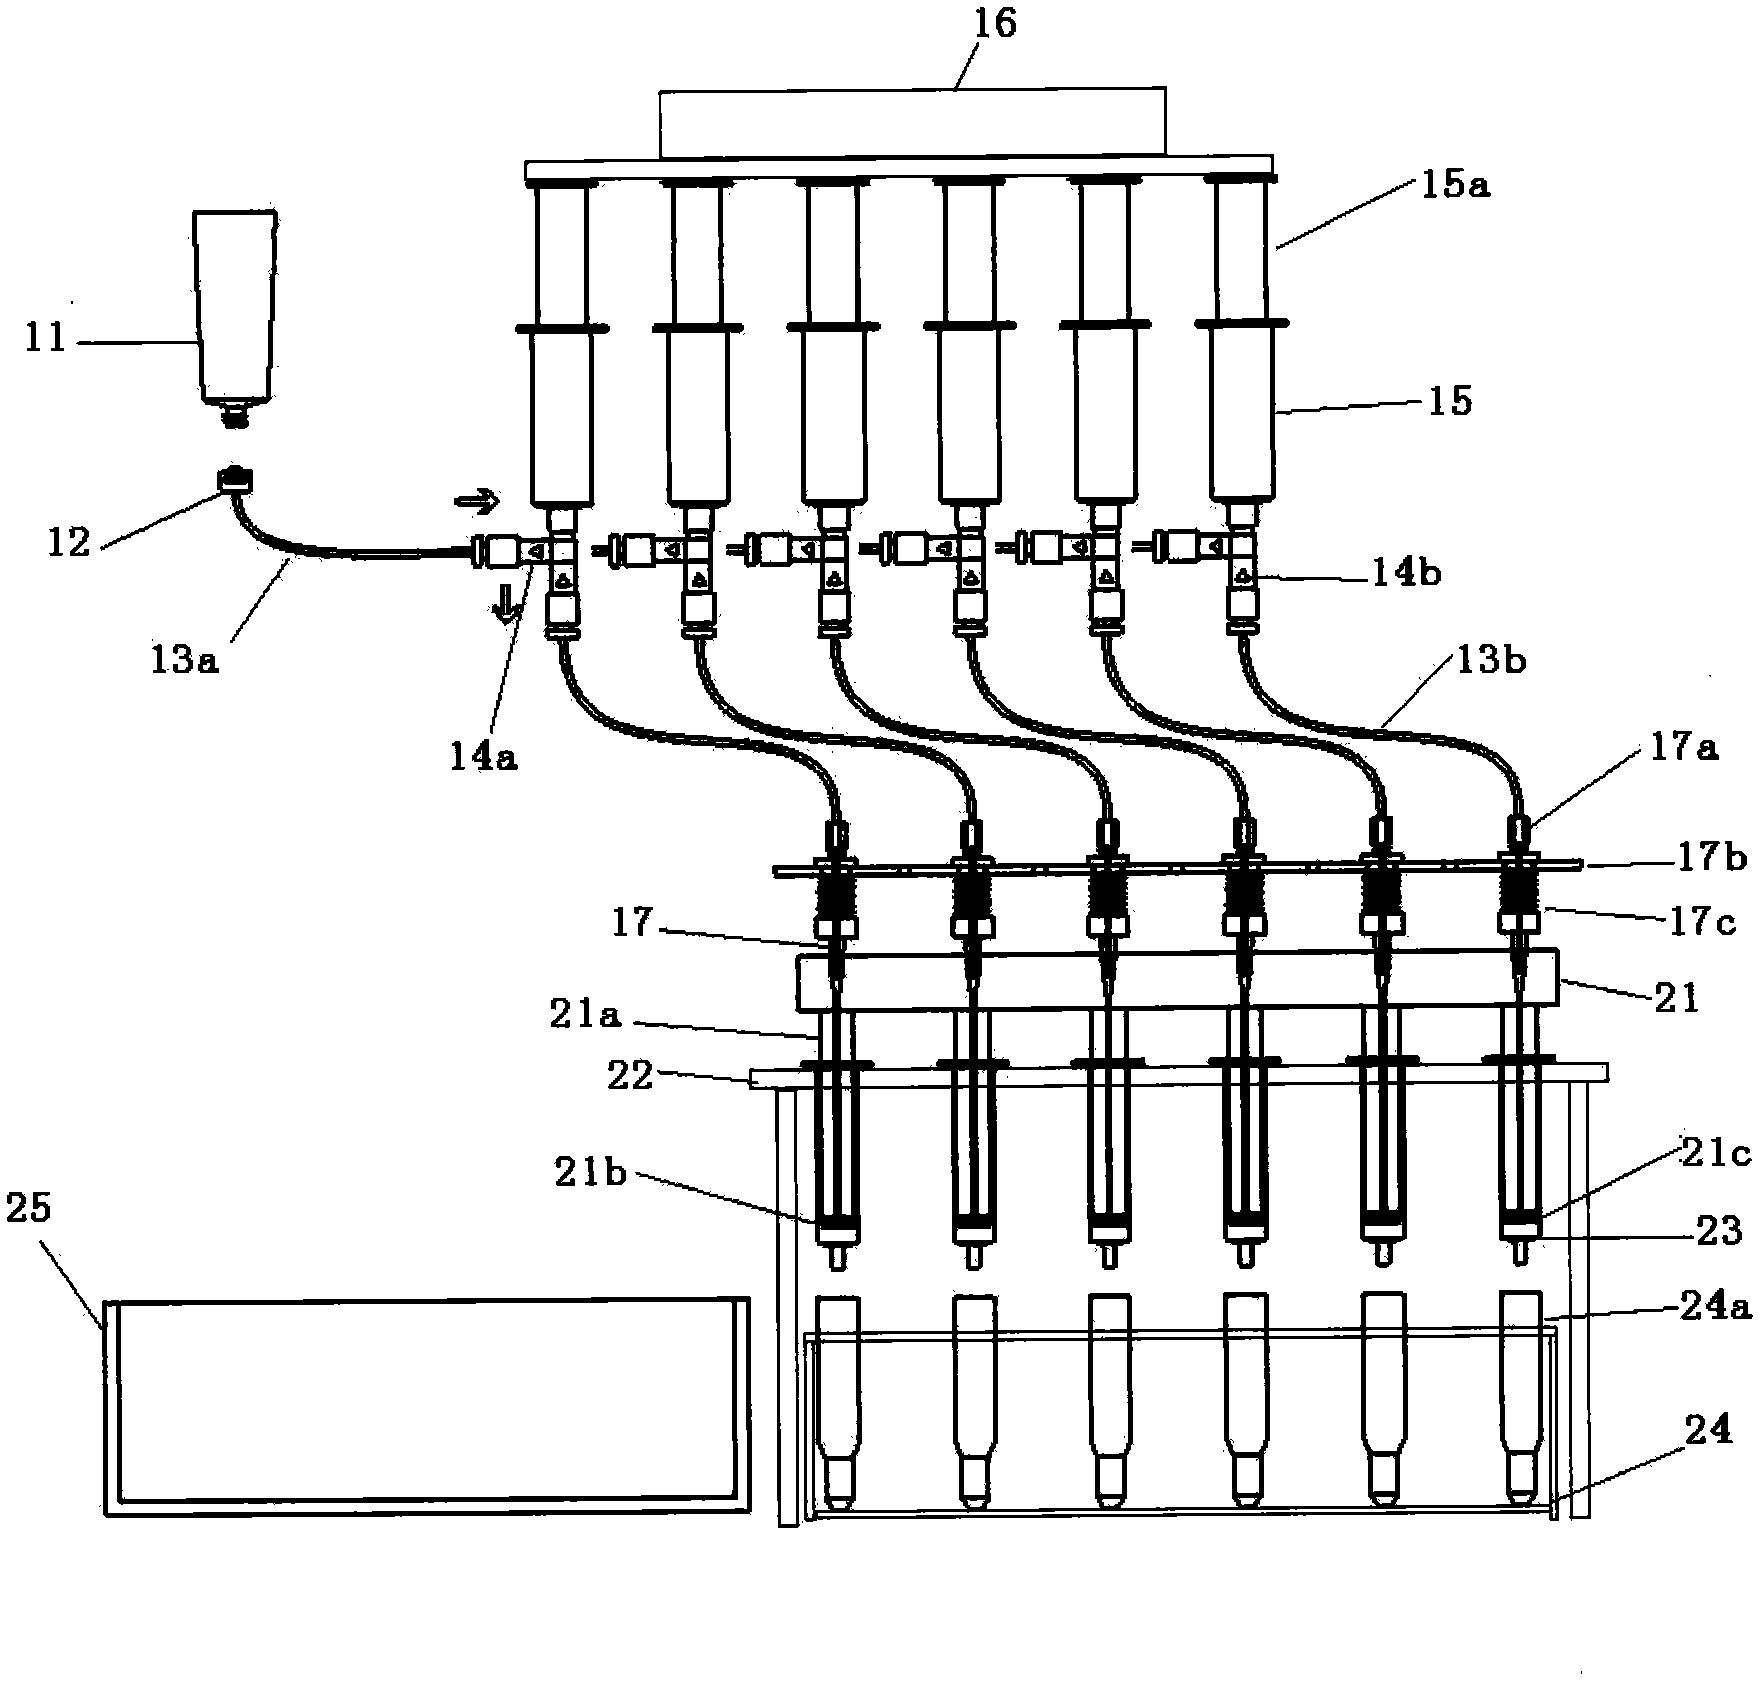 Pressurization solid phase extraction device